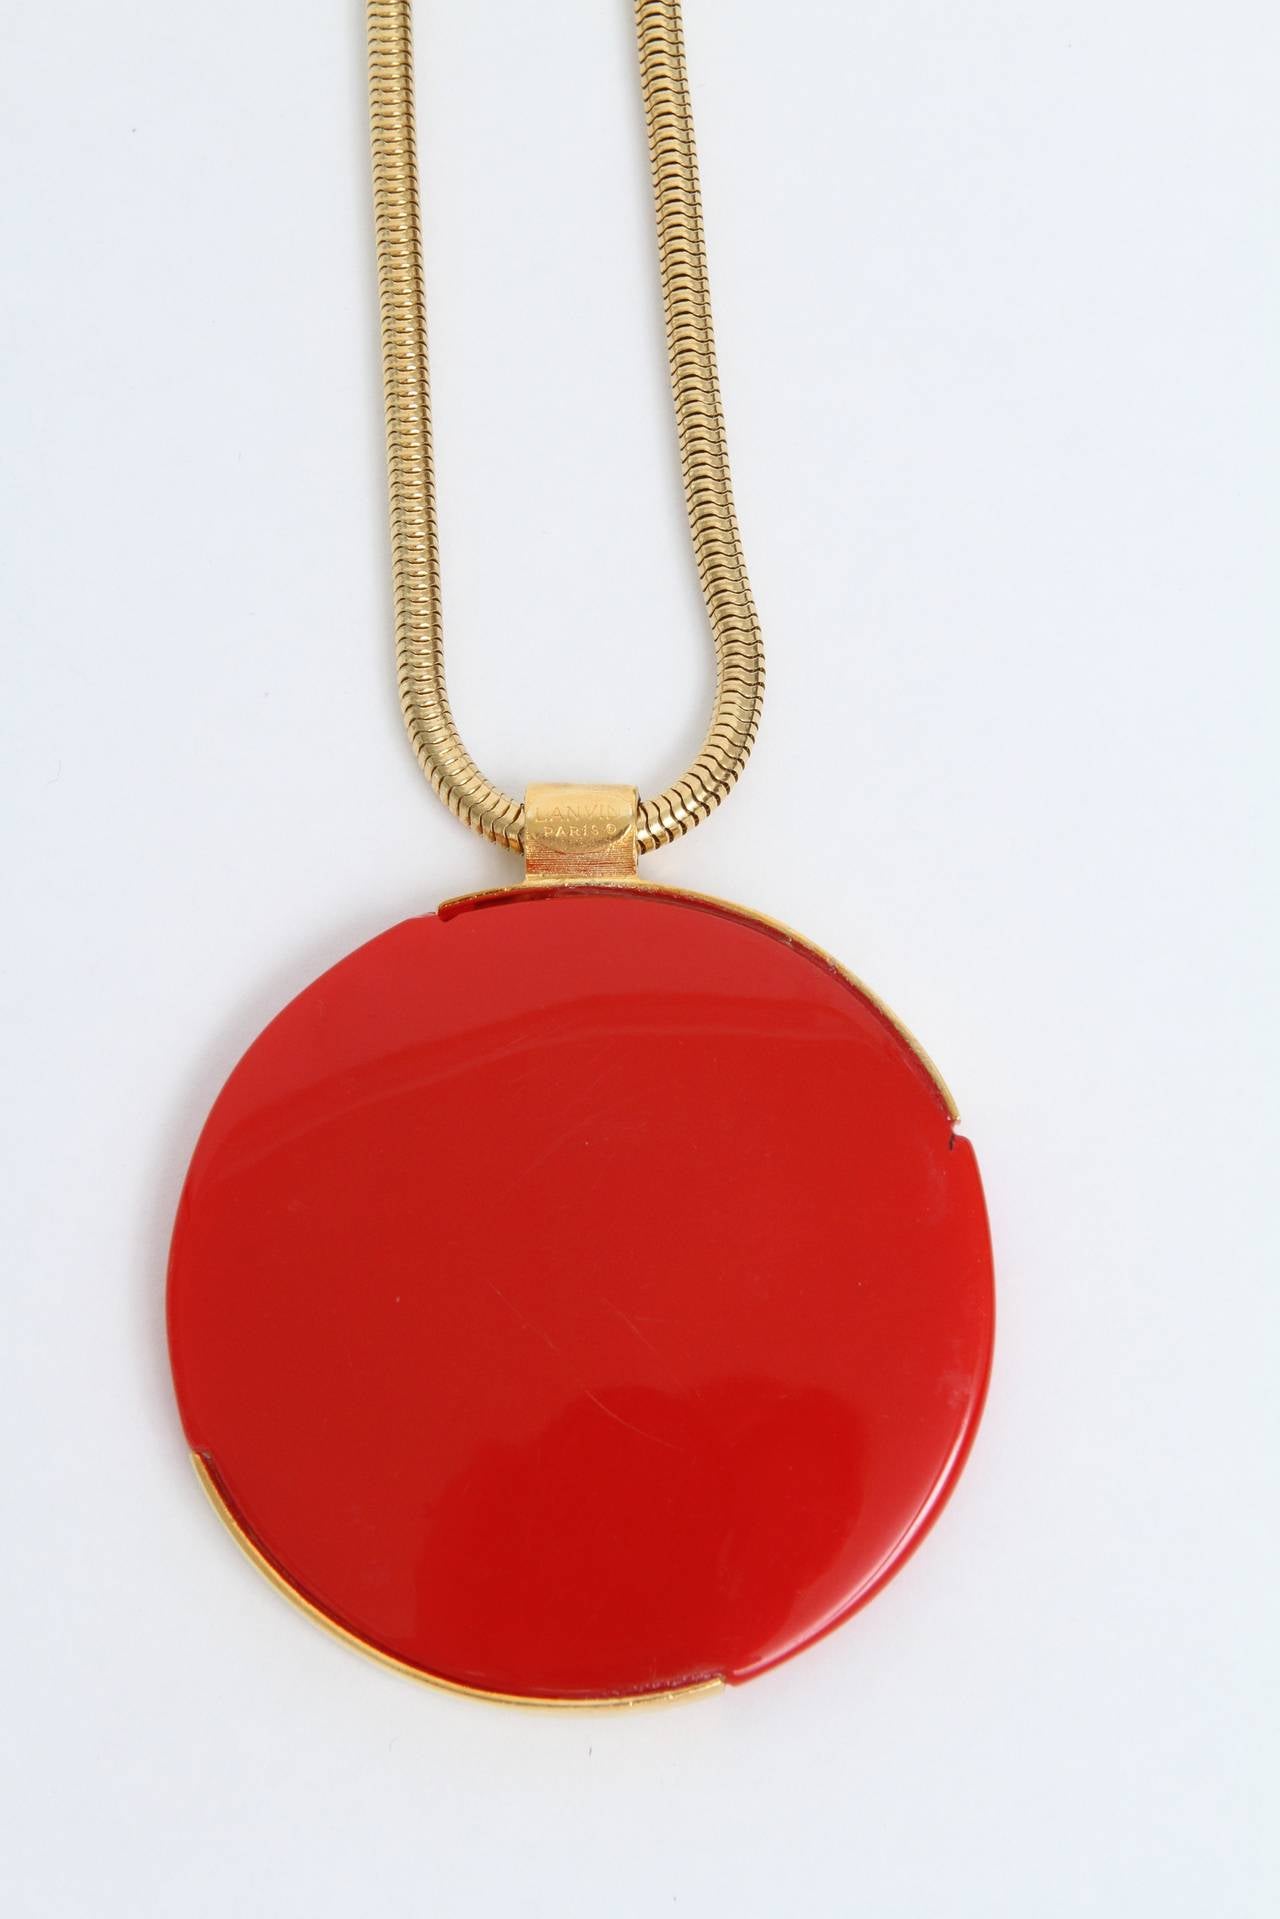 Lanvin Pendant Necklace In Excellent Condition For Sale In Topanga, CA